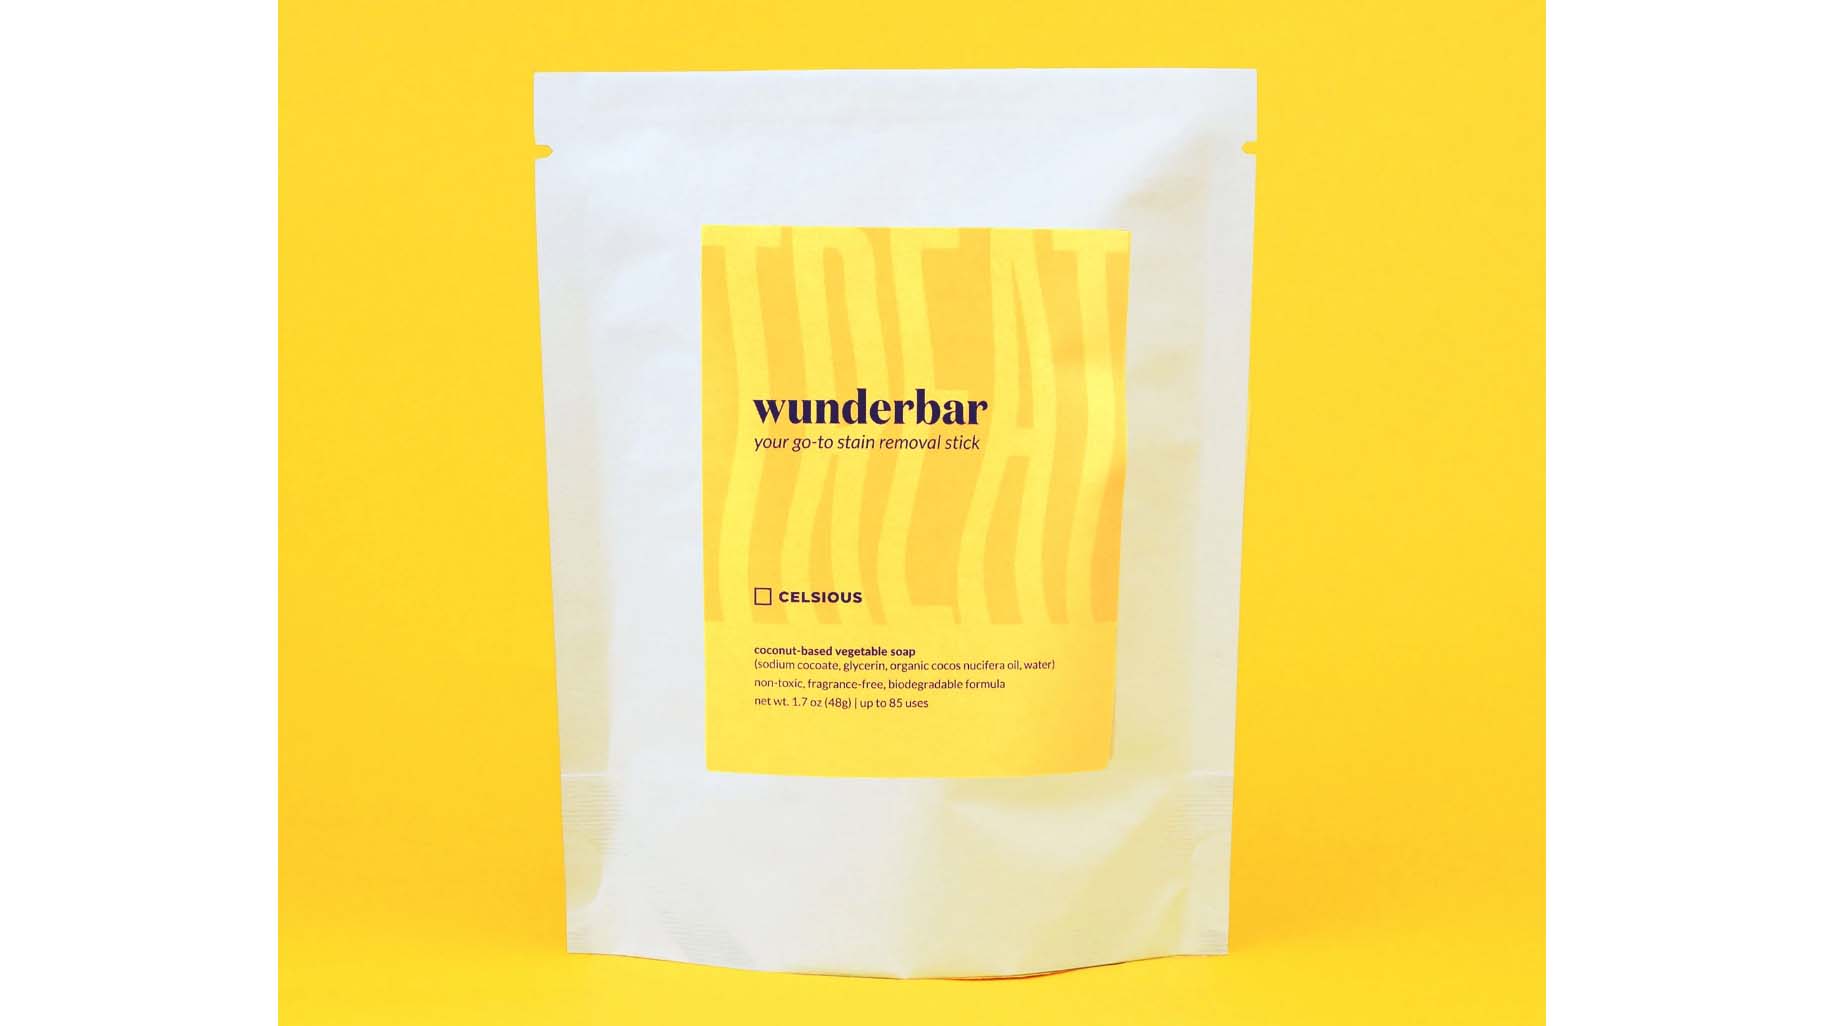 Underscored trusted | to sustainably guide how on CNN laundry wash Our